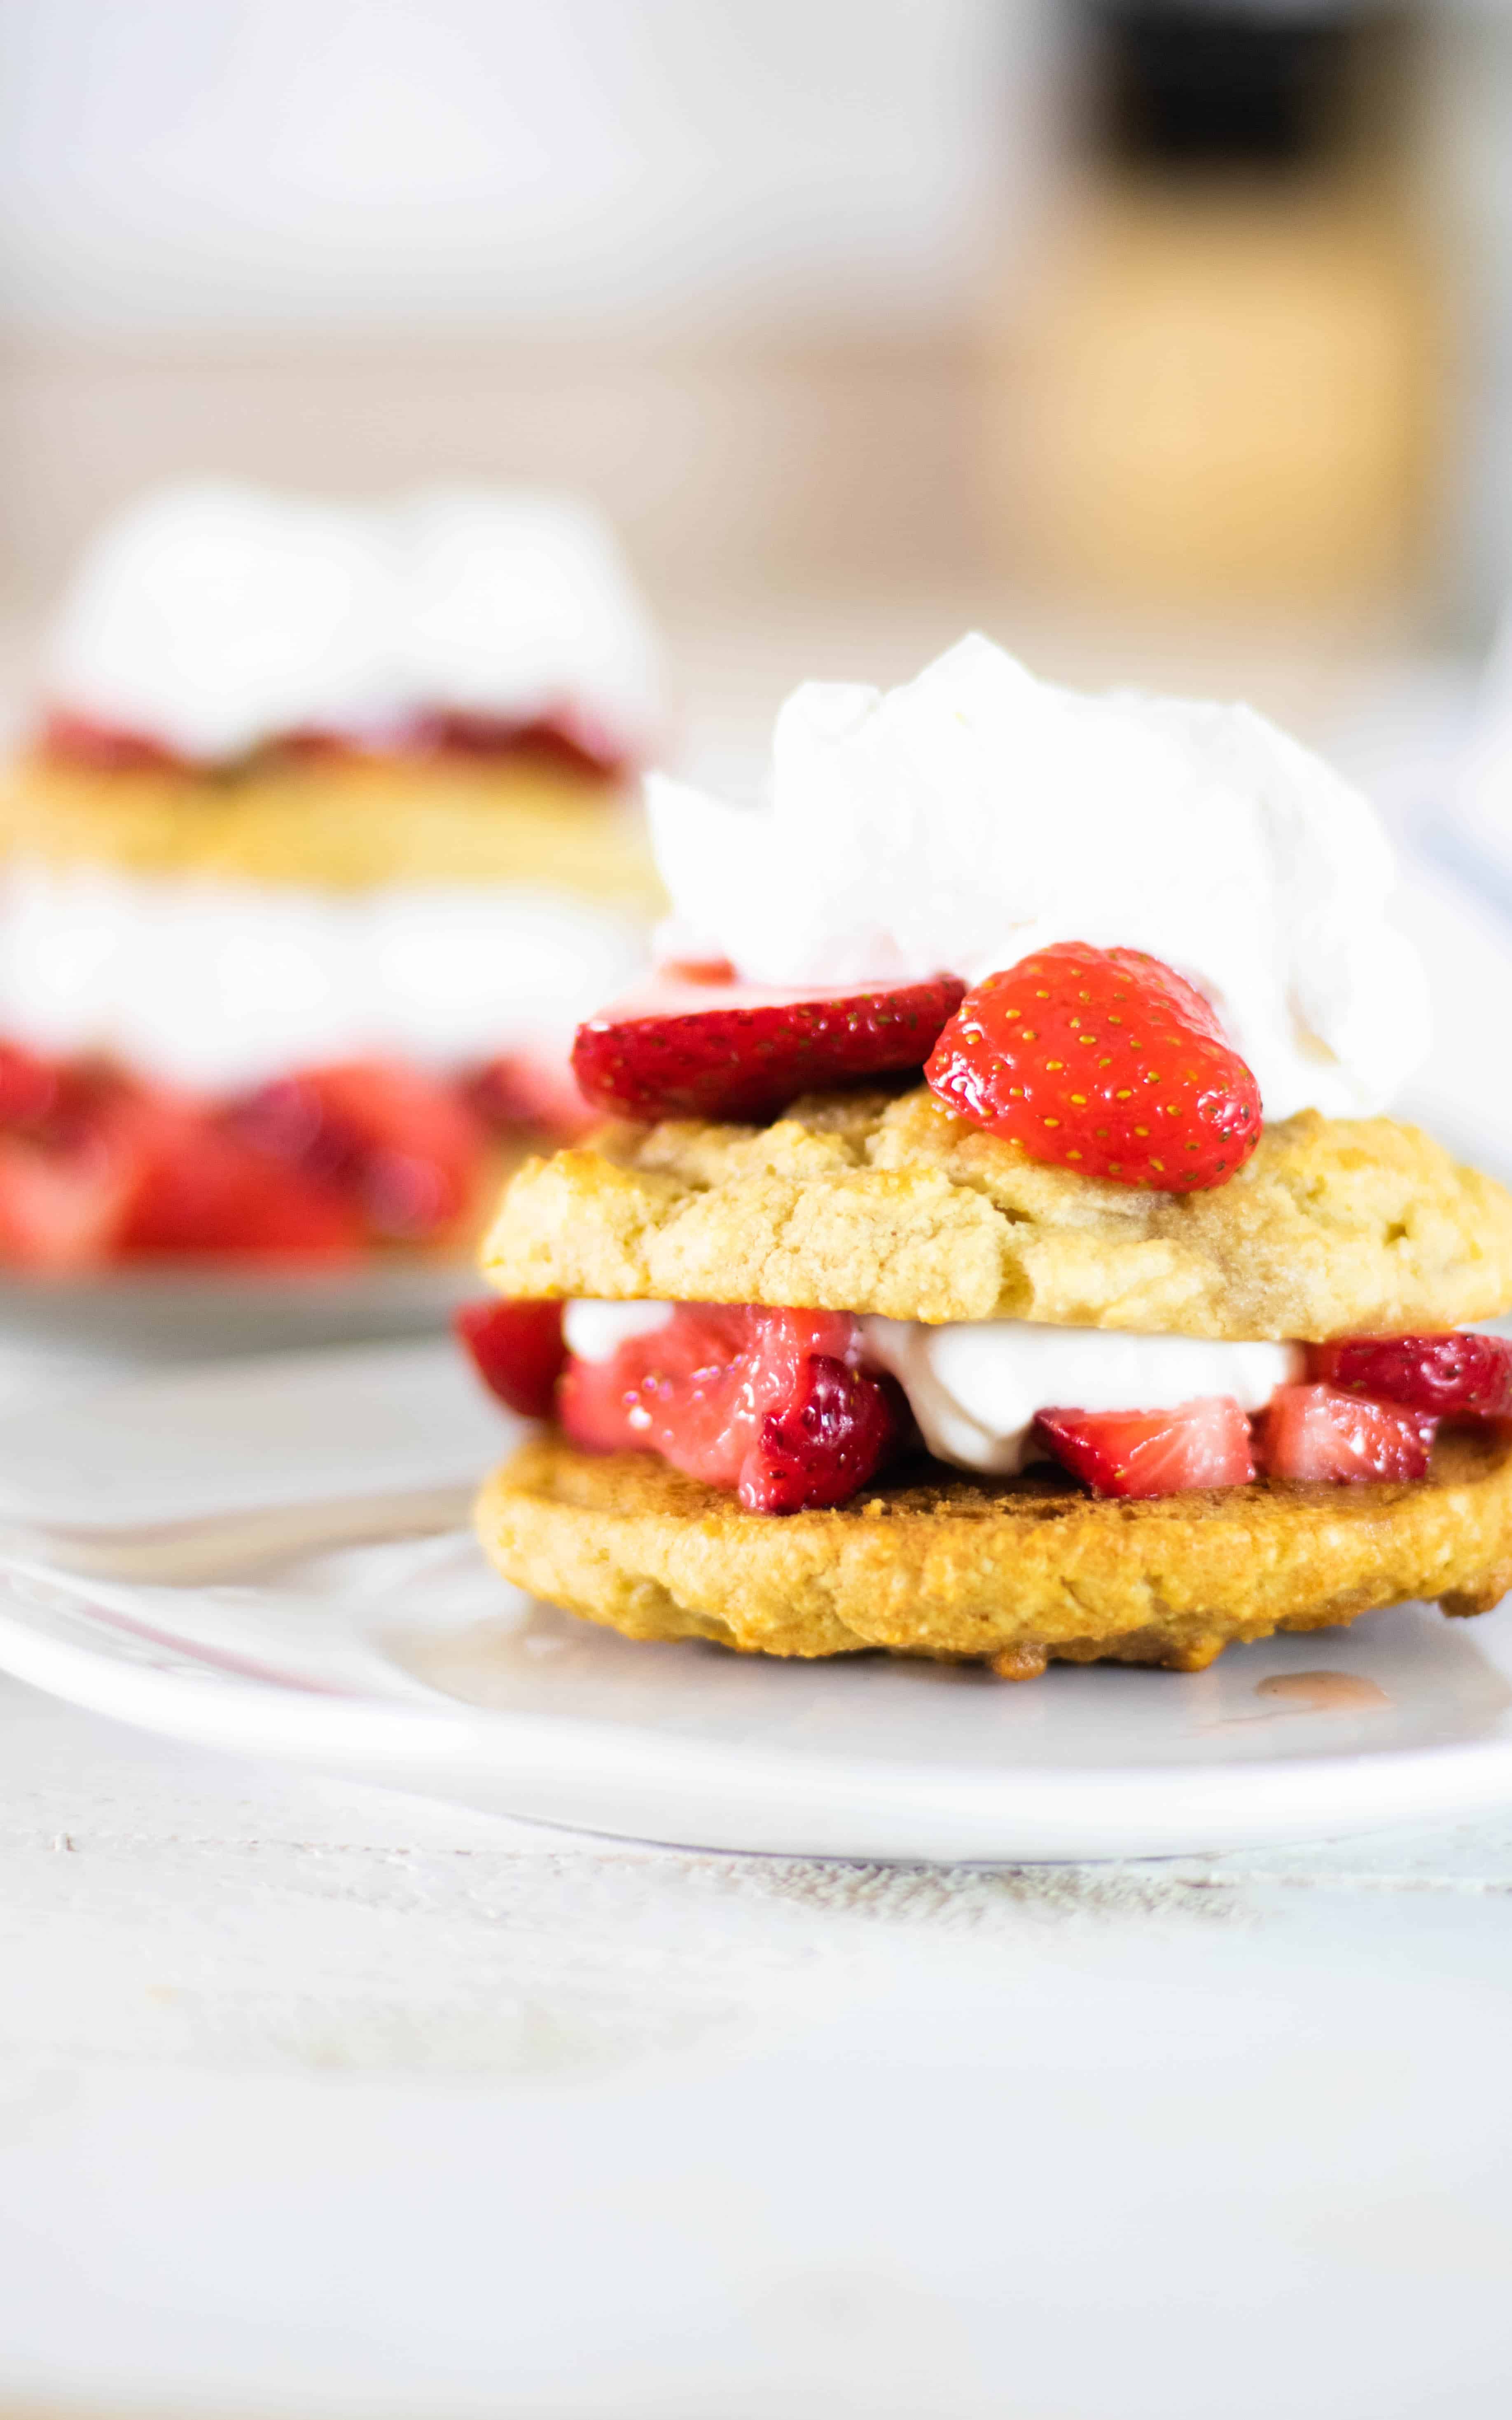 Strawberry shortcakes sandwich topped and filled with whipped cream and fresh strawberries.